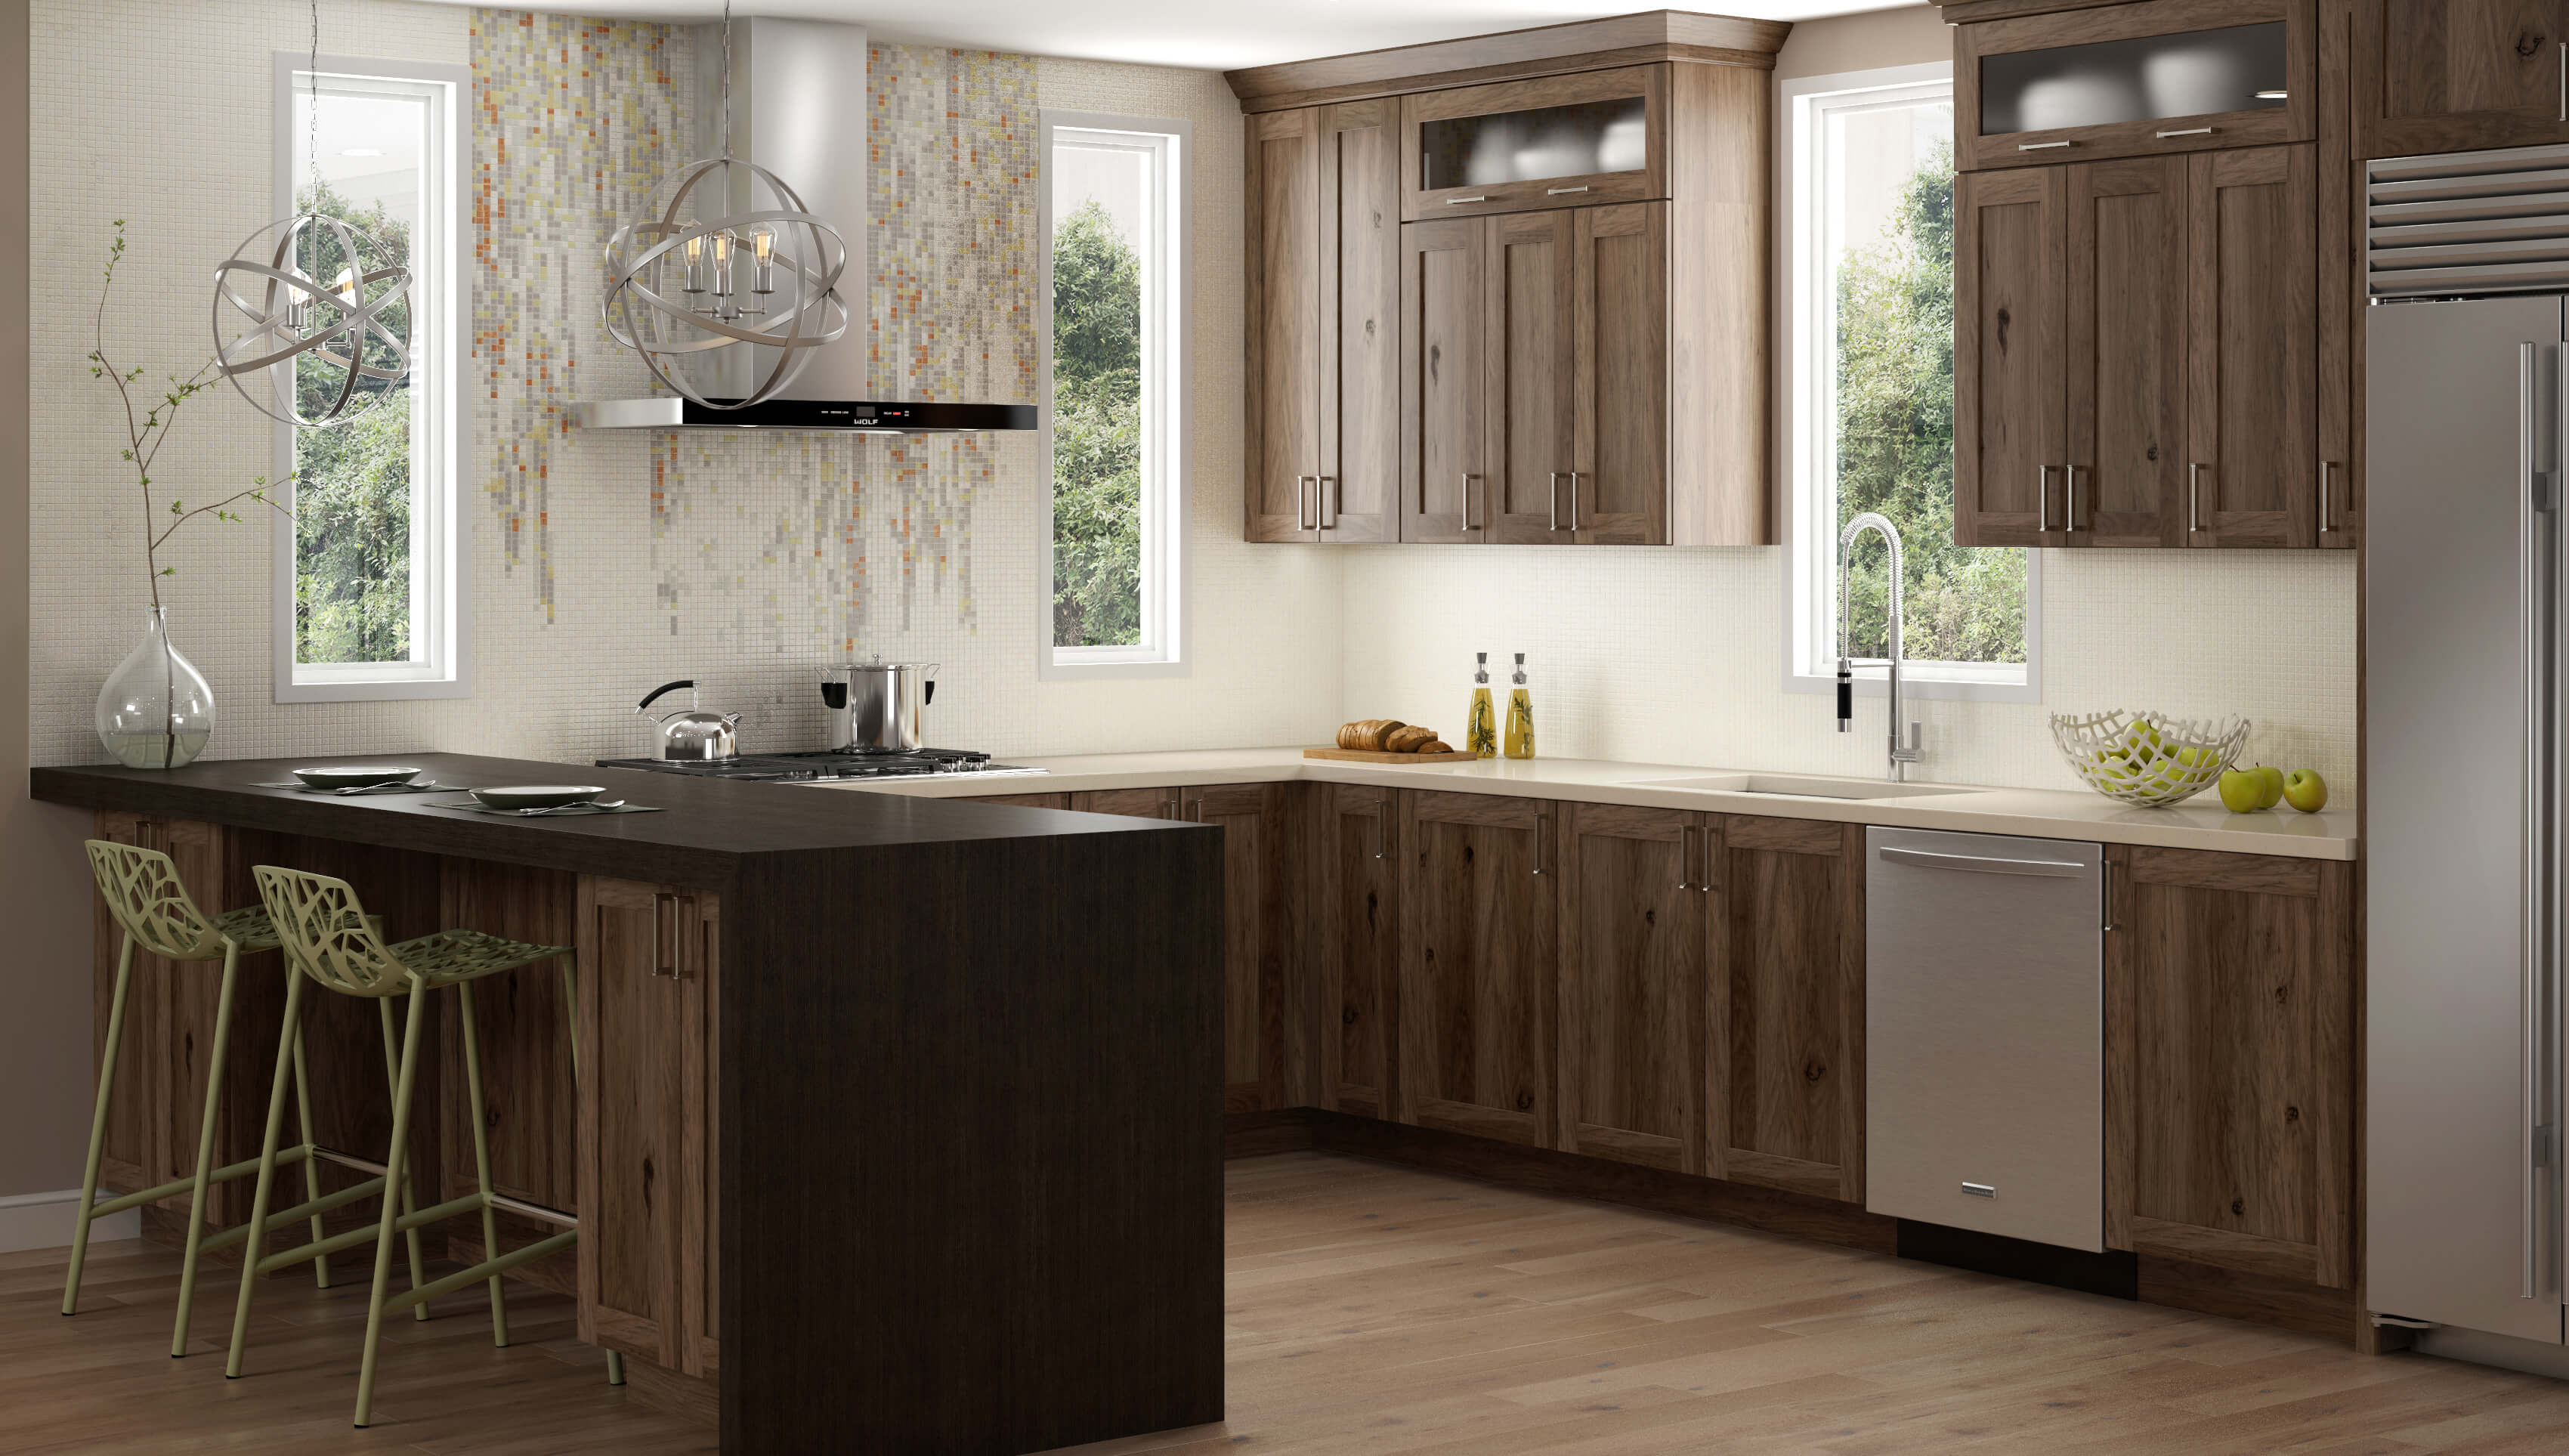 A modern kitchen with rustic hickory cabinets with a gray stained finish.